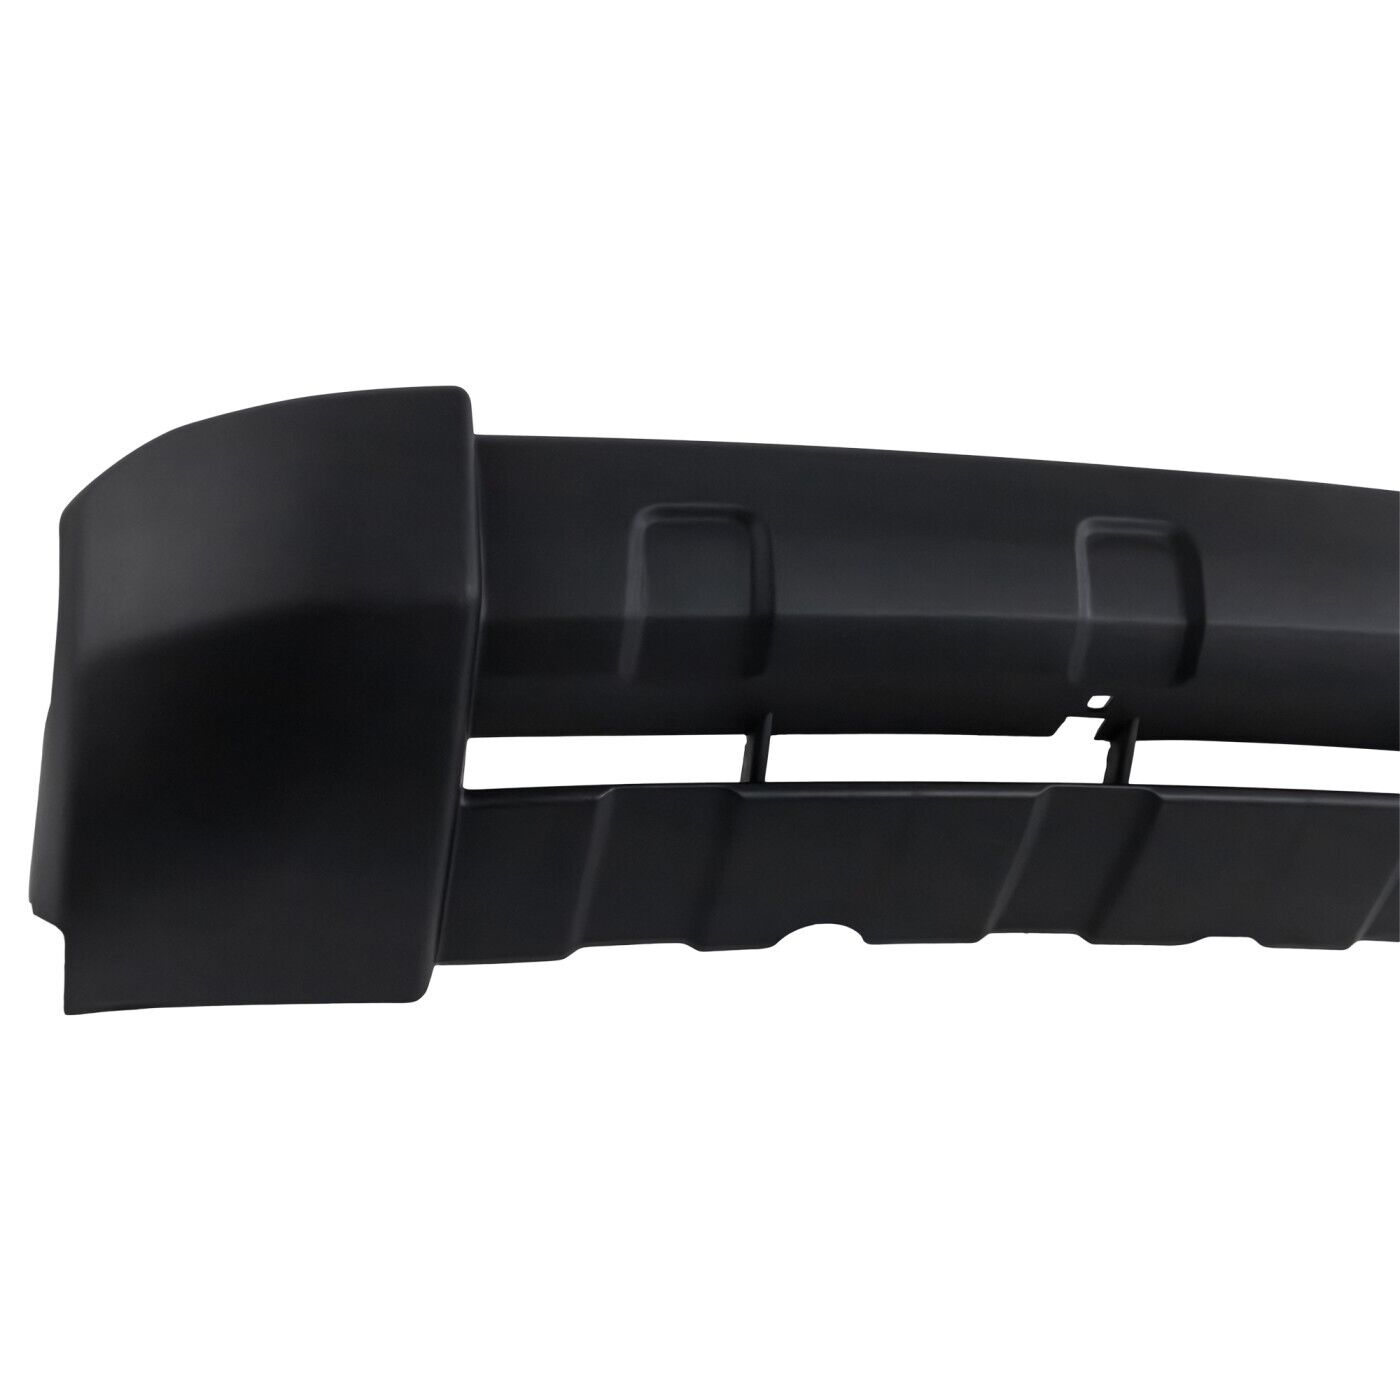 2006-2008 HONDA PILOT; Front Bumper Cover lower skid plate; Painted to Match